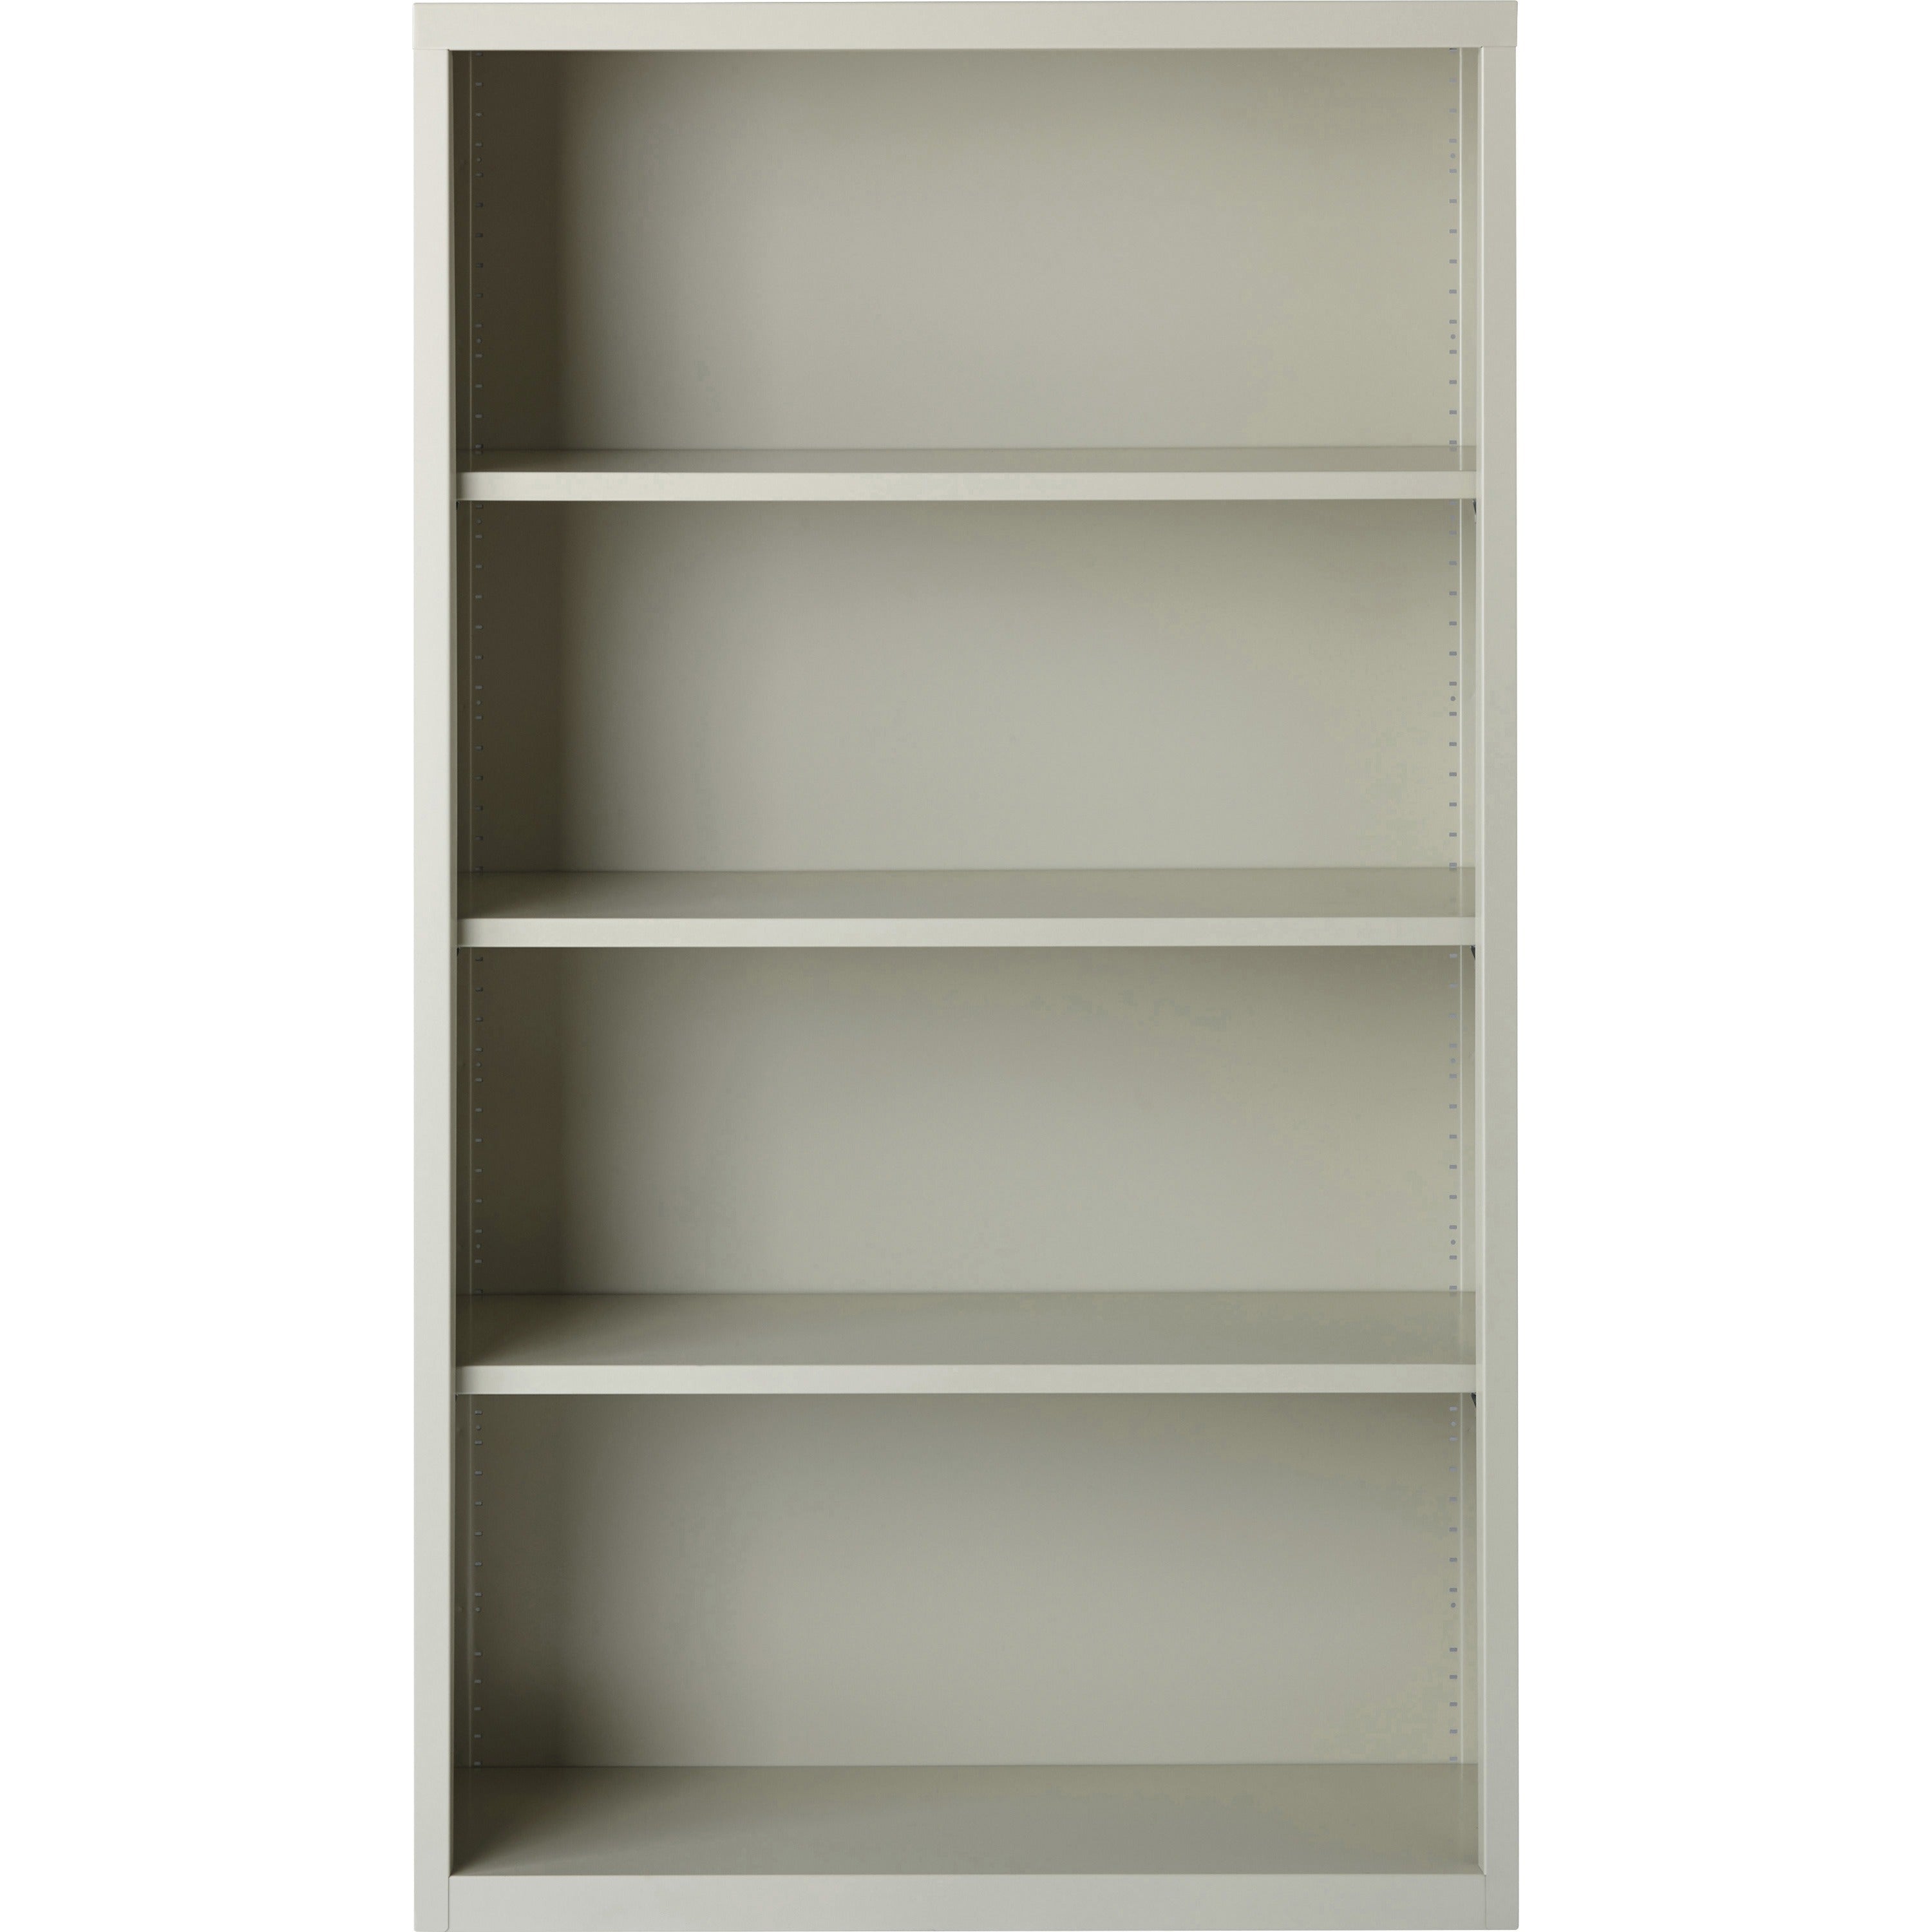 Lorell Fortress Series Bookcase - 34.5" x 13" x 60" - 4 x Shelf(ves) - Light Gray - Powder Coated - Steel - Recycled - 